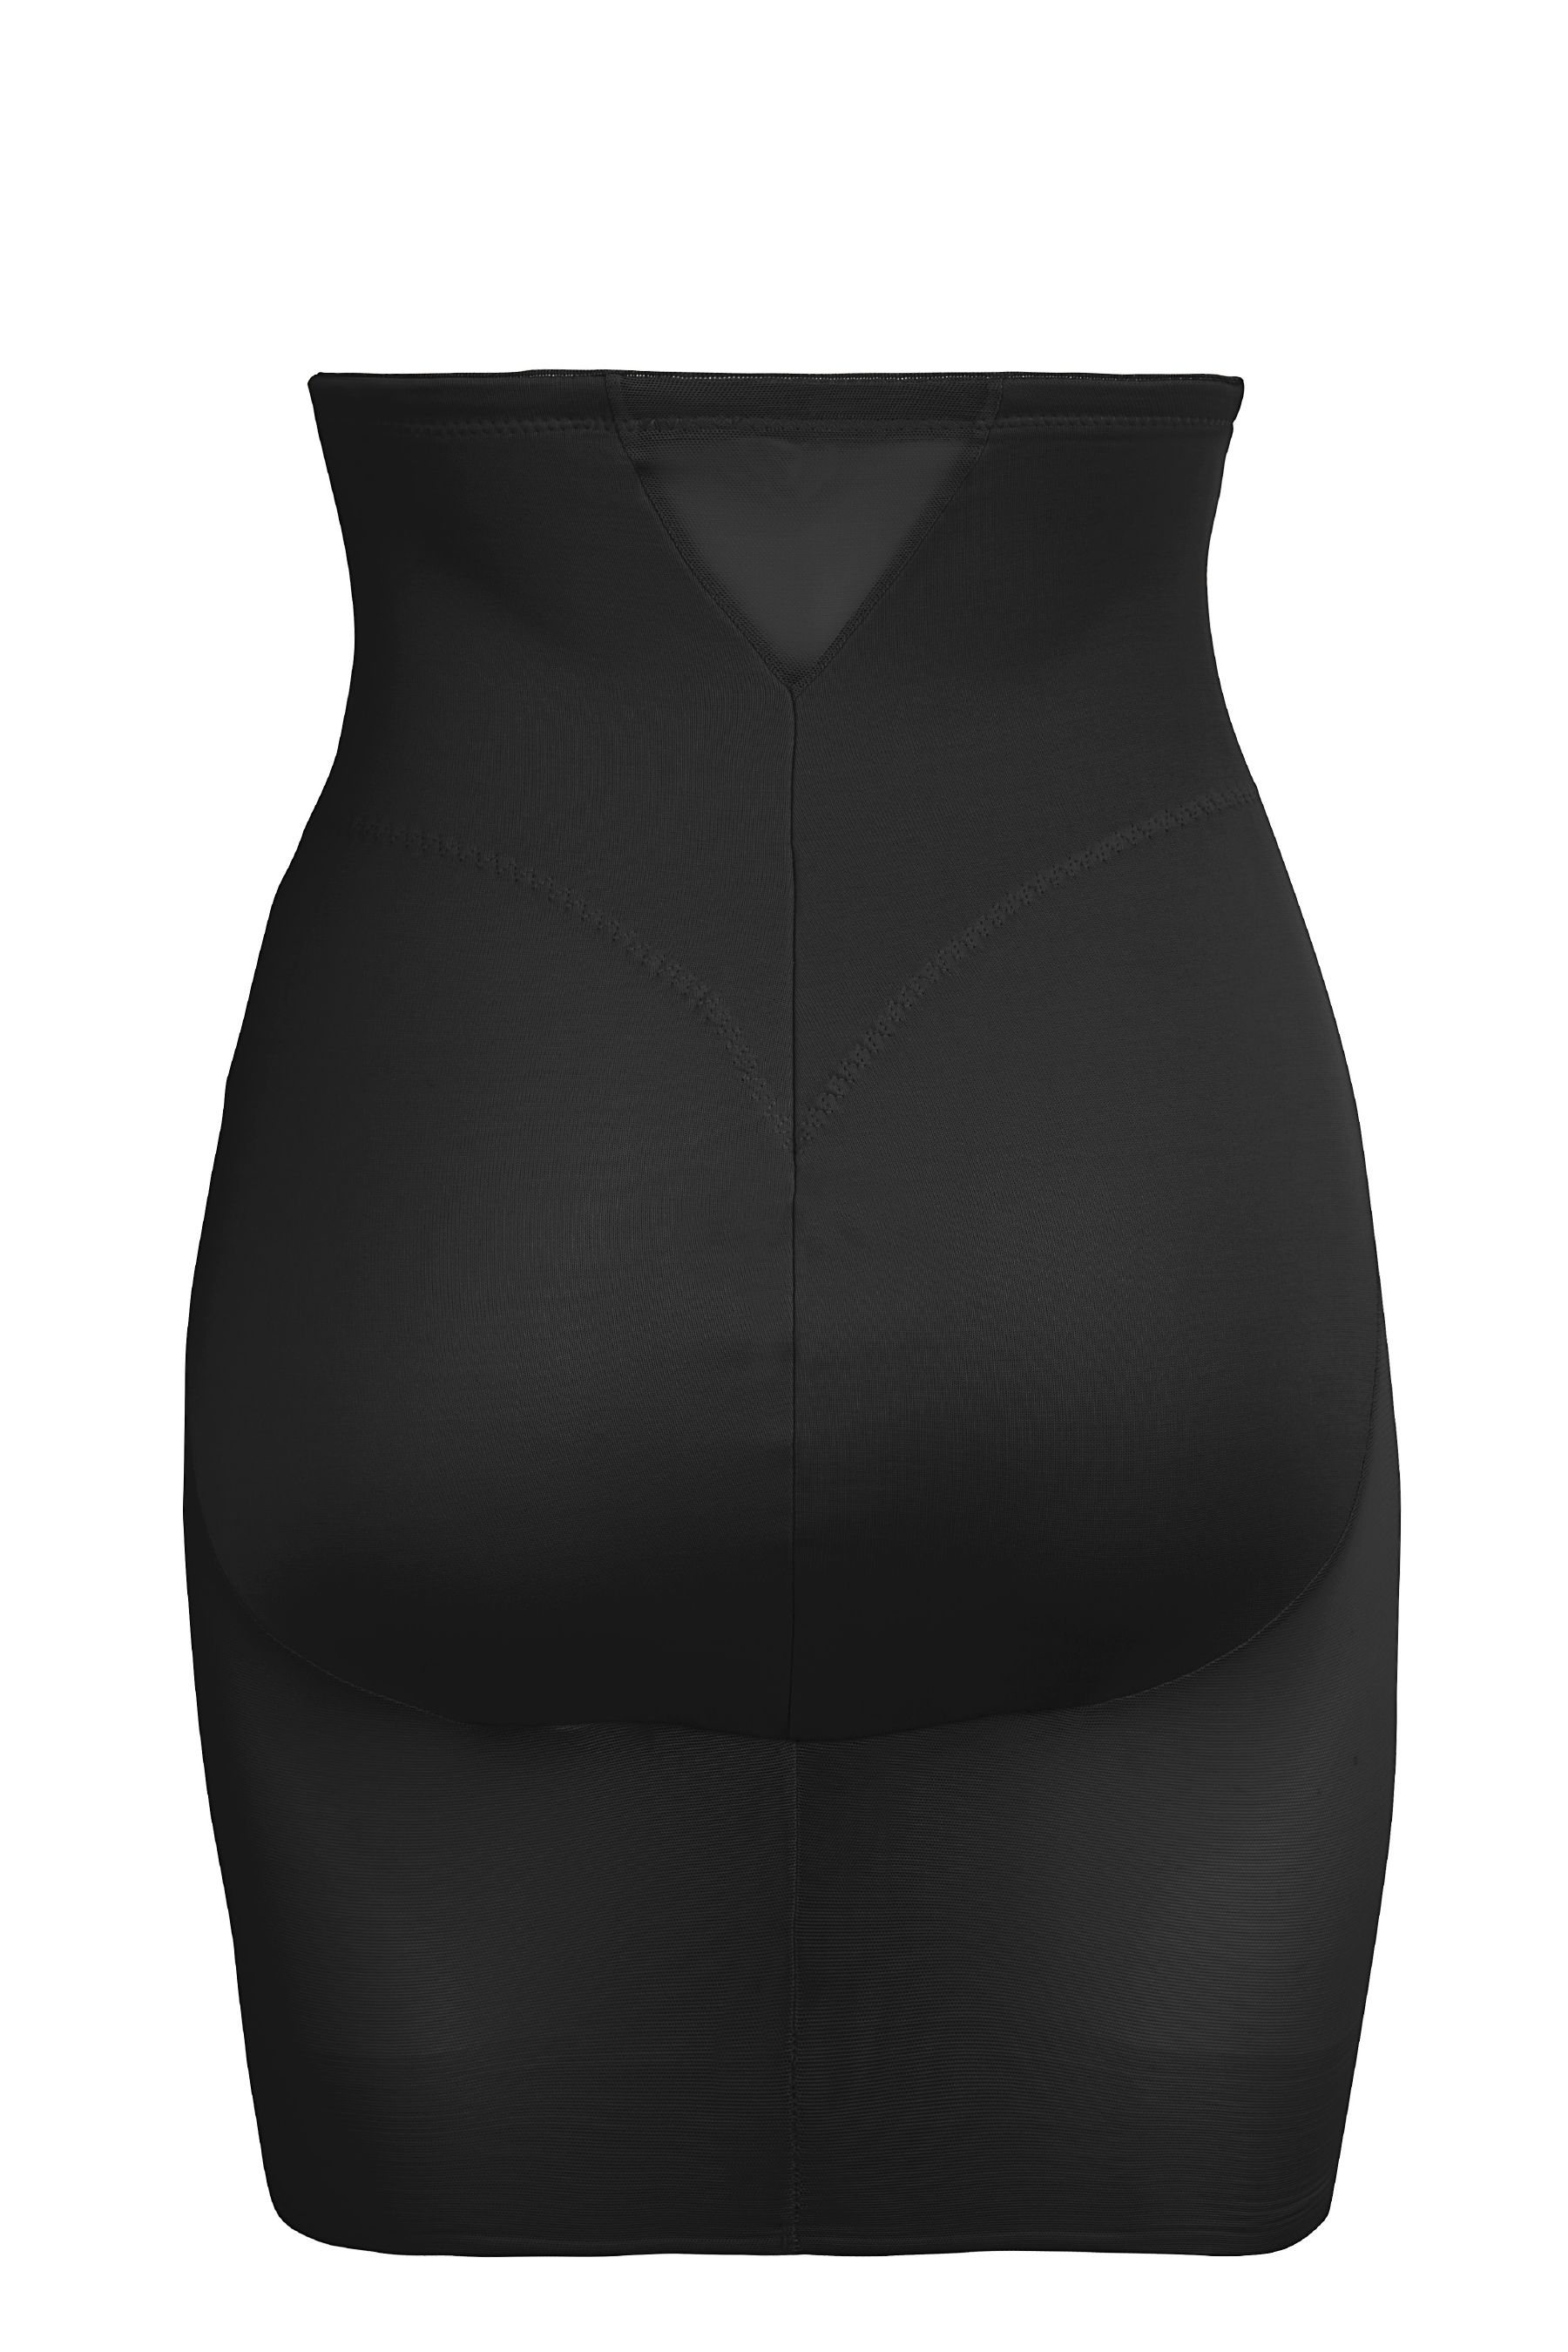 Buy Miraclesuit Extra Firm Control High Waisted Shapewear Slip from the ...